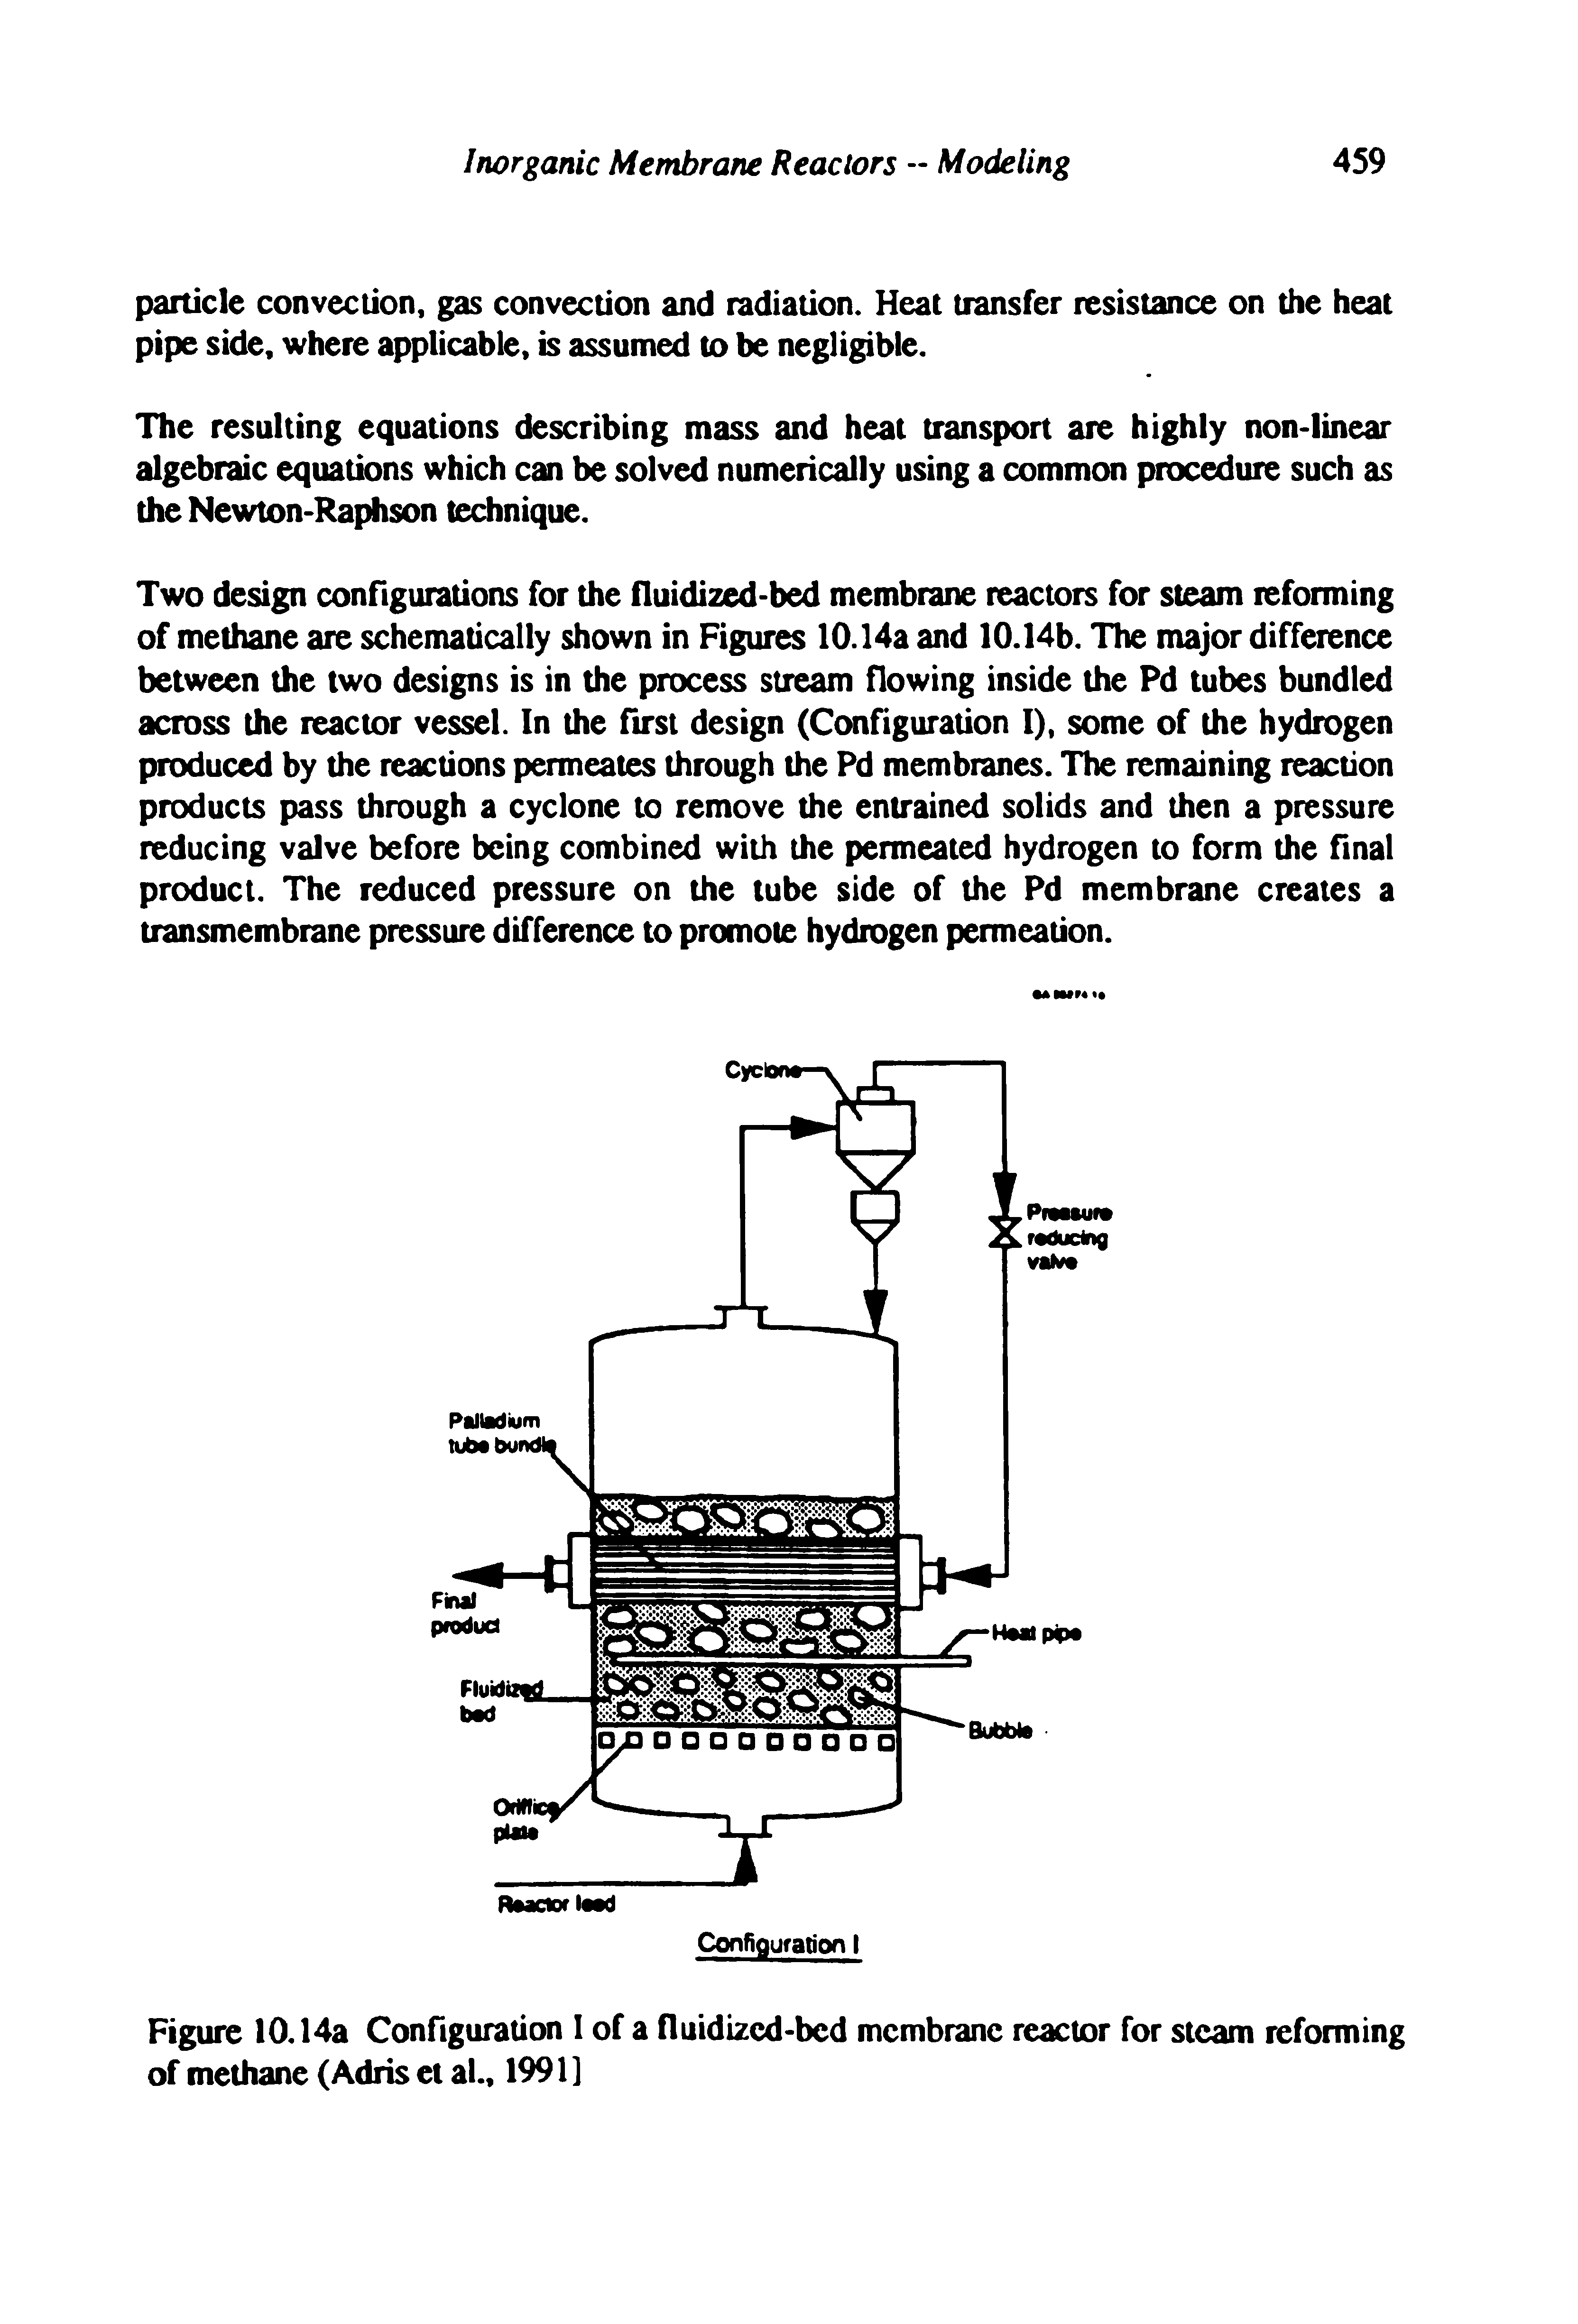 Figure 10.14a Configuration I of a nuidizcd-bed membrane reactor for steam reforming of methane (Adris el al., 1991]...